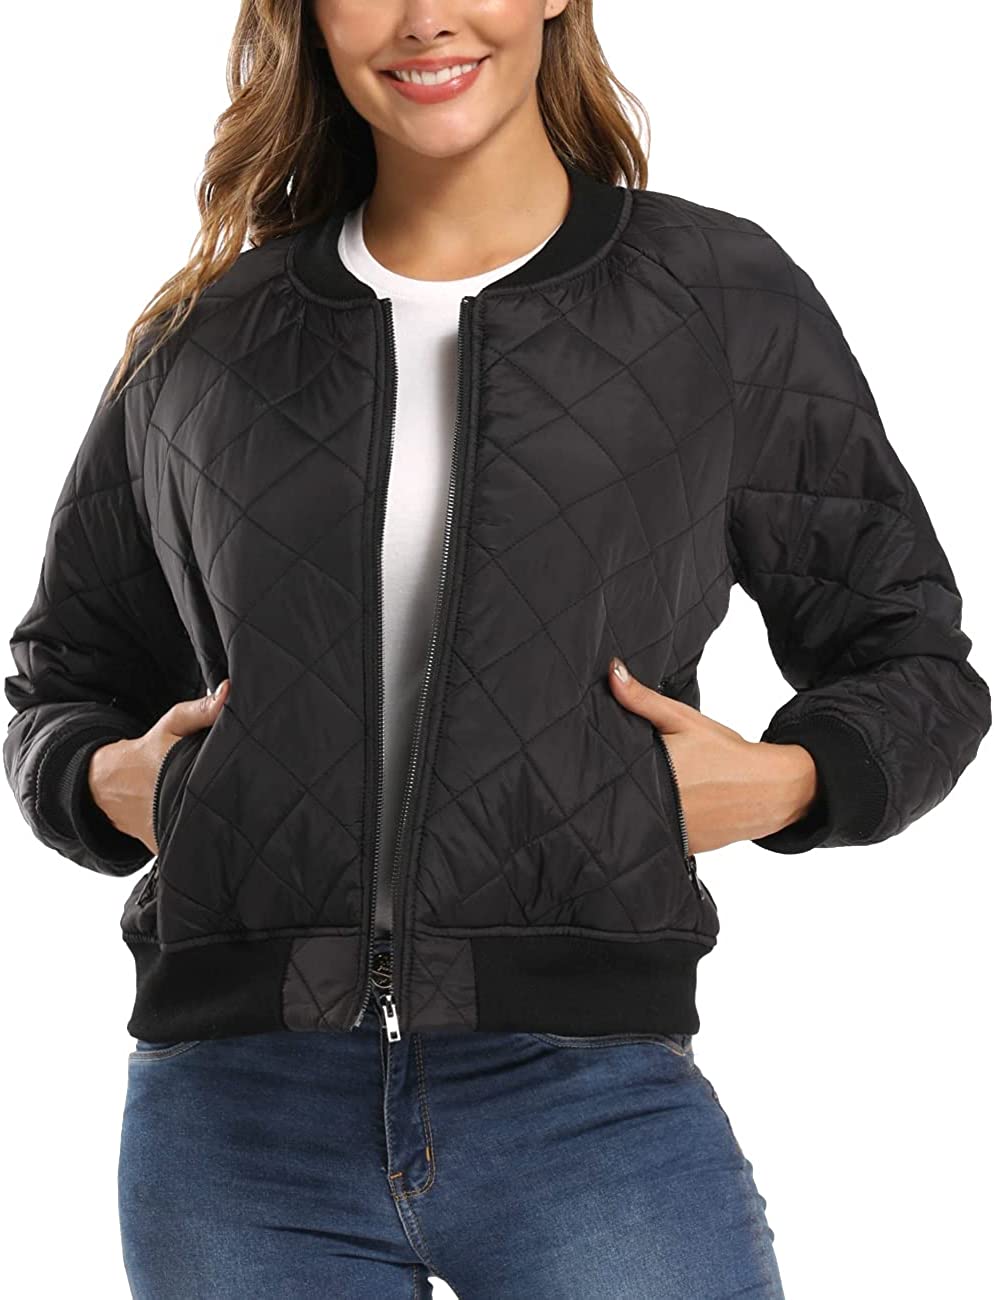 Dilgul Womens Quilted Jacket Lightweight Long Sleeves Zip Up Raglan Bomber Jackets with Pockets